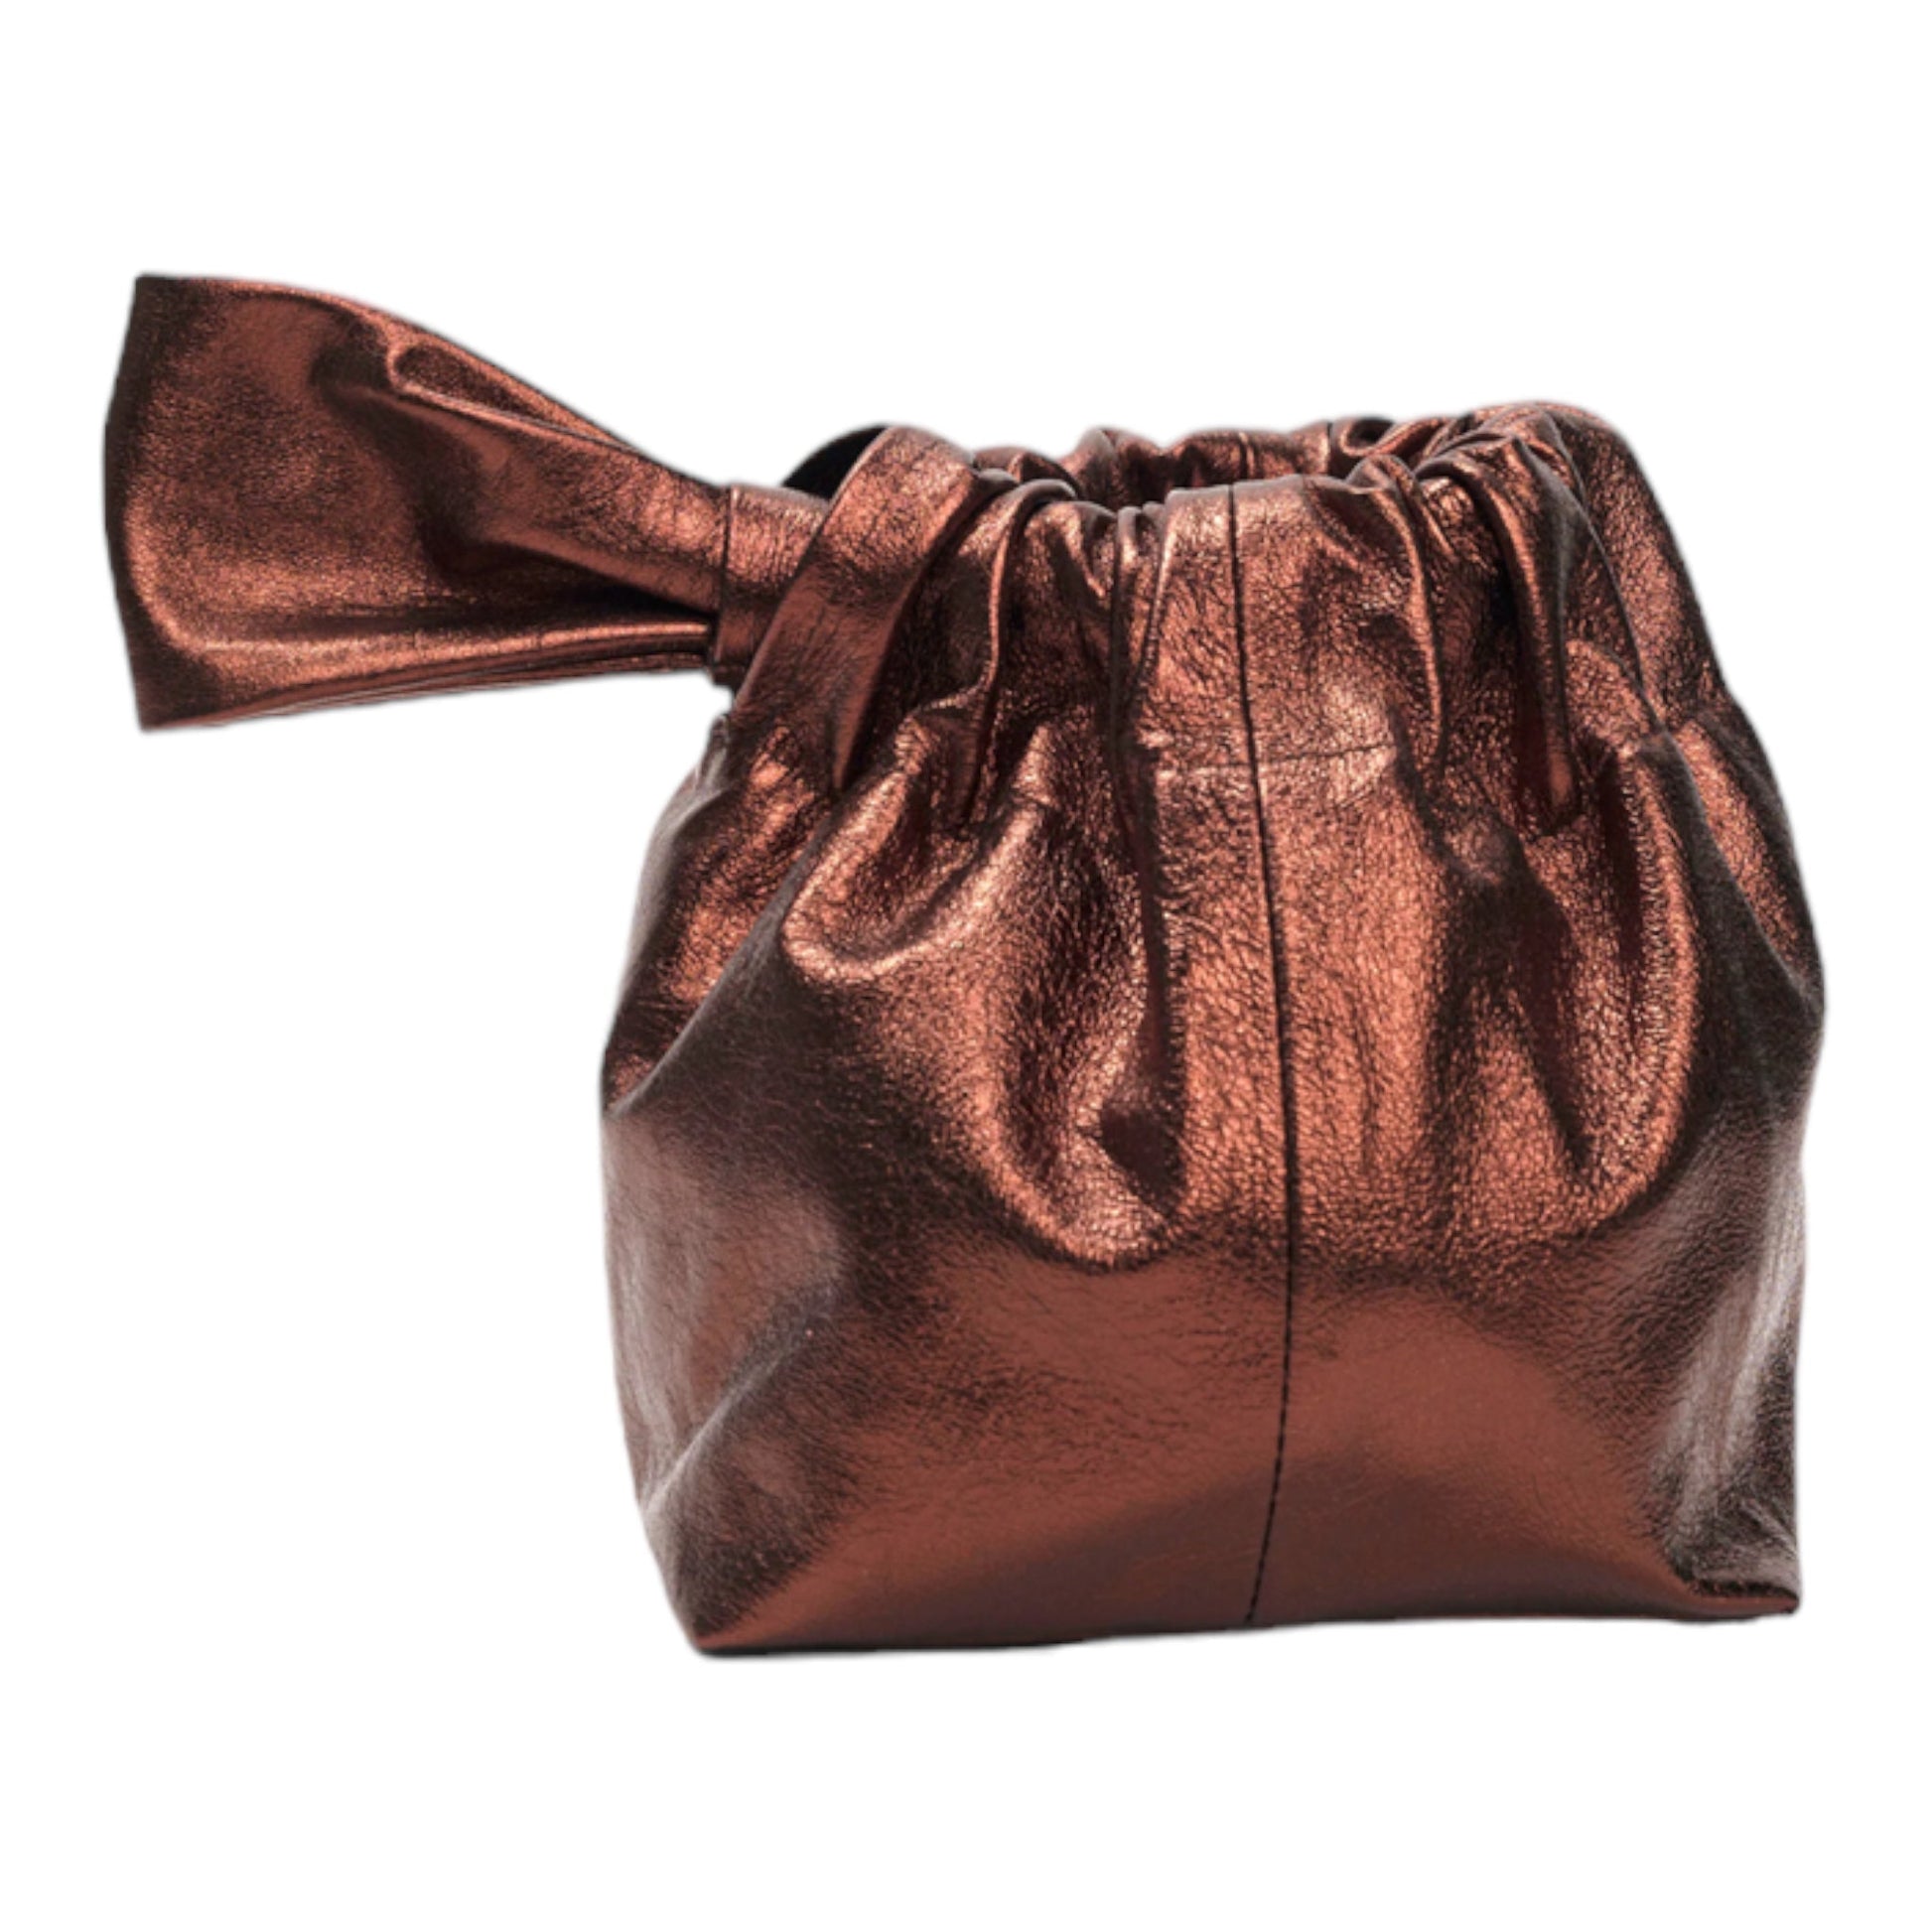 MARIPOSA IN COPPER - Something about Sofia